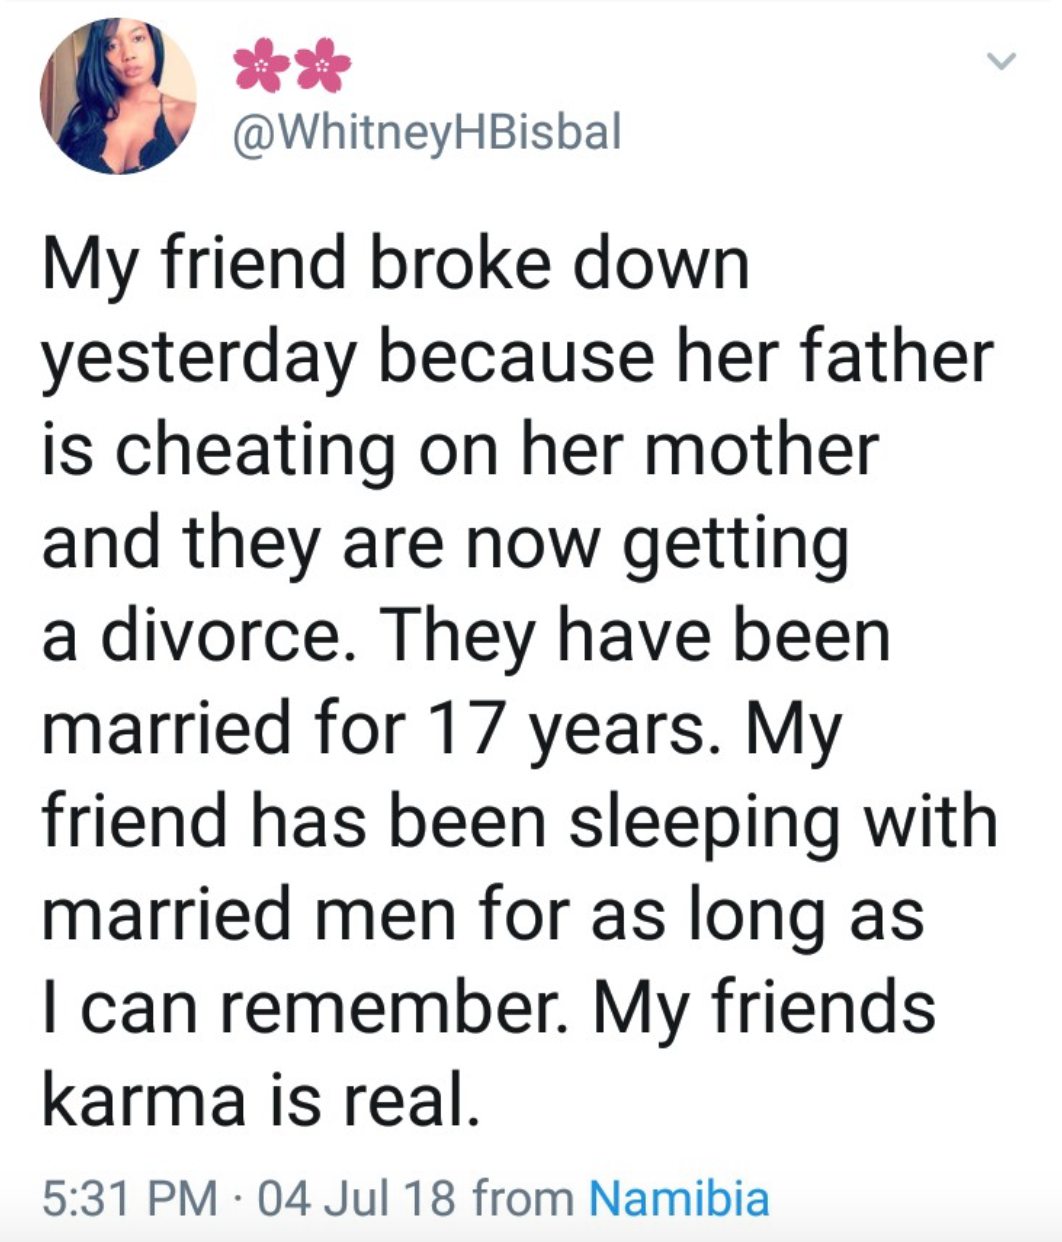 Small Girl, Bigger God: Lady Who Sleeps With Married Men, Gets Heartbroken As Her Dad Cheats On Her Mum